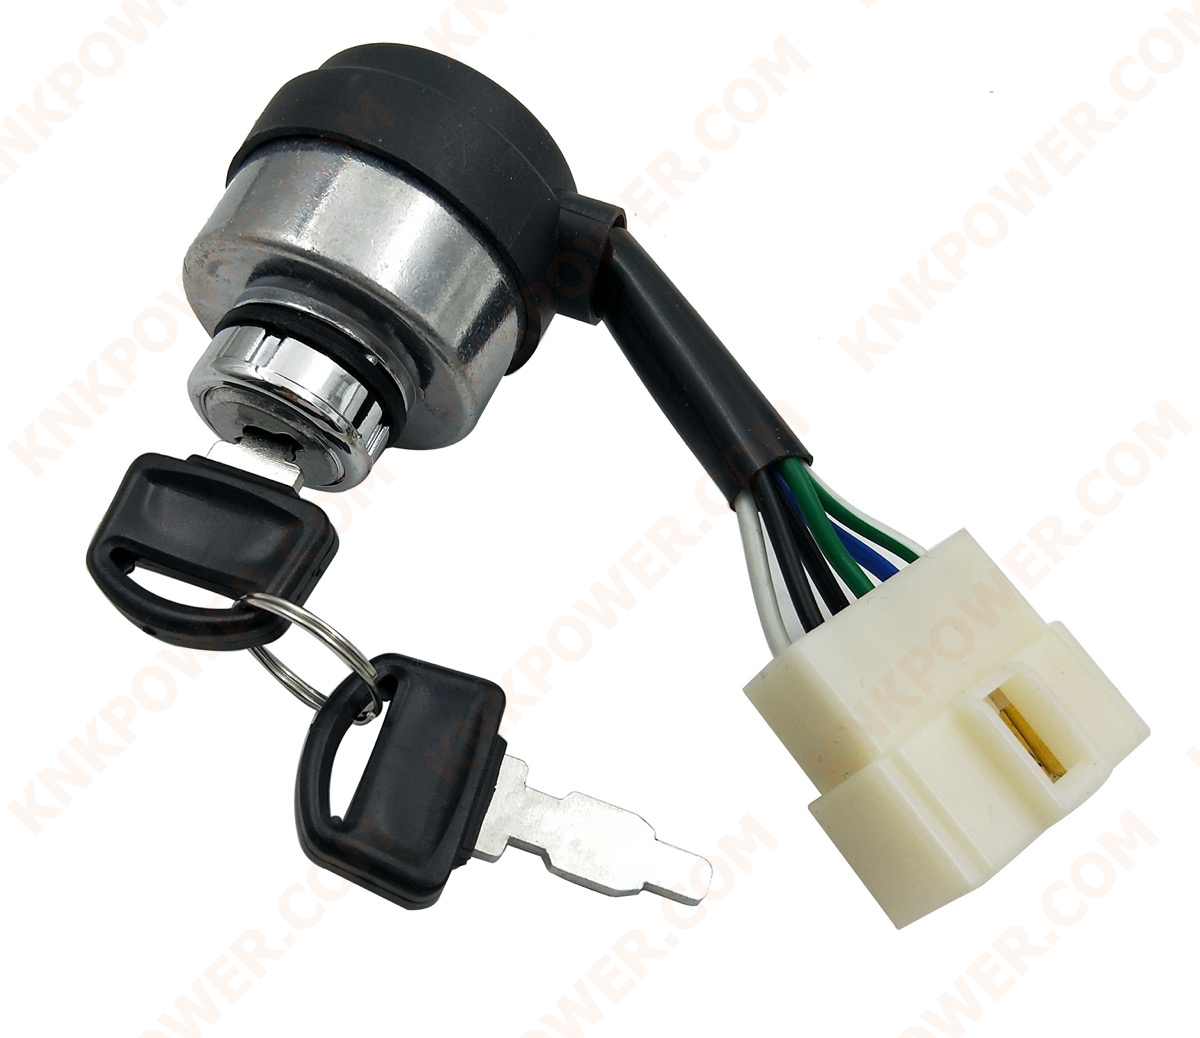 knkpower [16283] 6 WIRE IGNITION START KEY SWITCH FOR 2.5-6.5KW 188F GAS GENERATOR